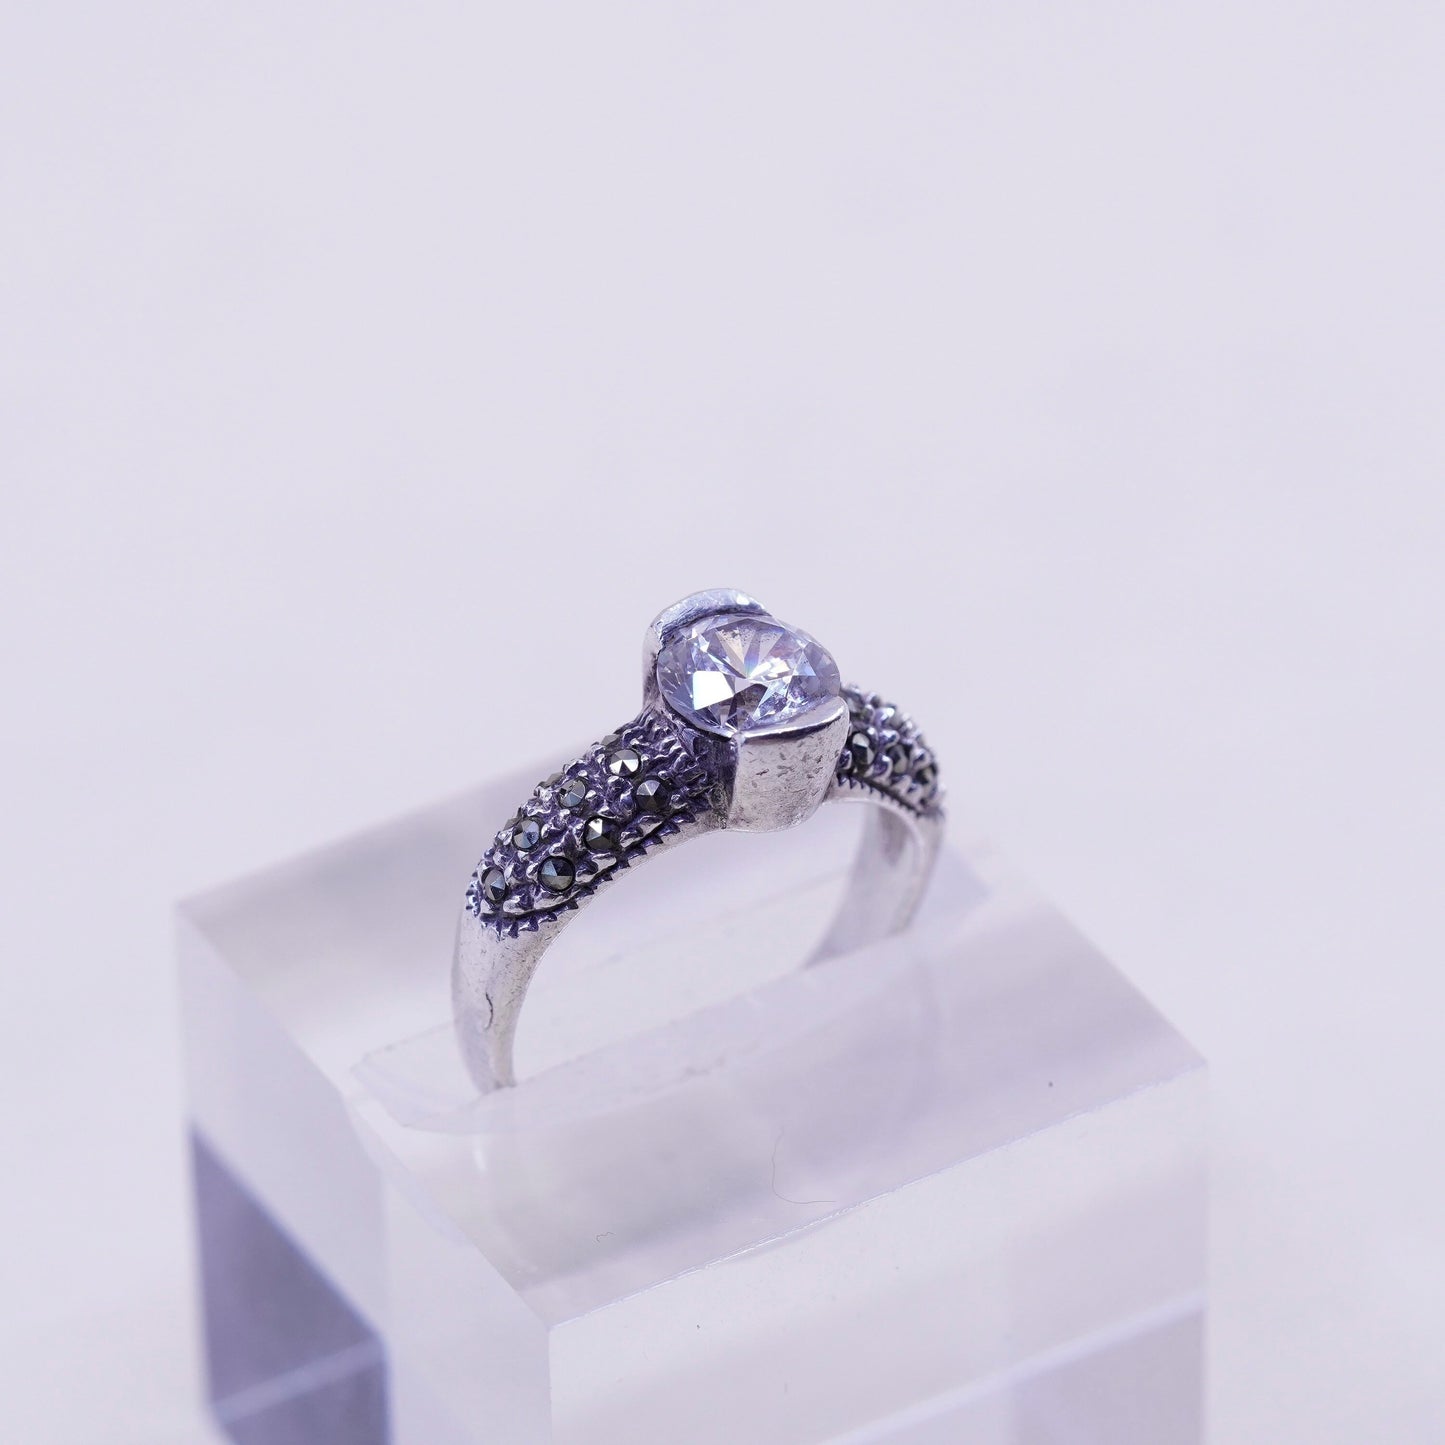 Size 7.5, Sterling silver handmade ring, 925 with CZ and marcasite